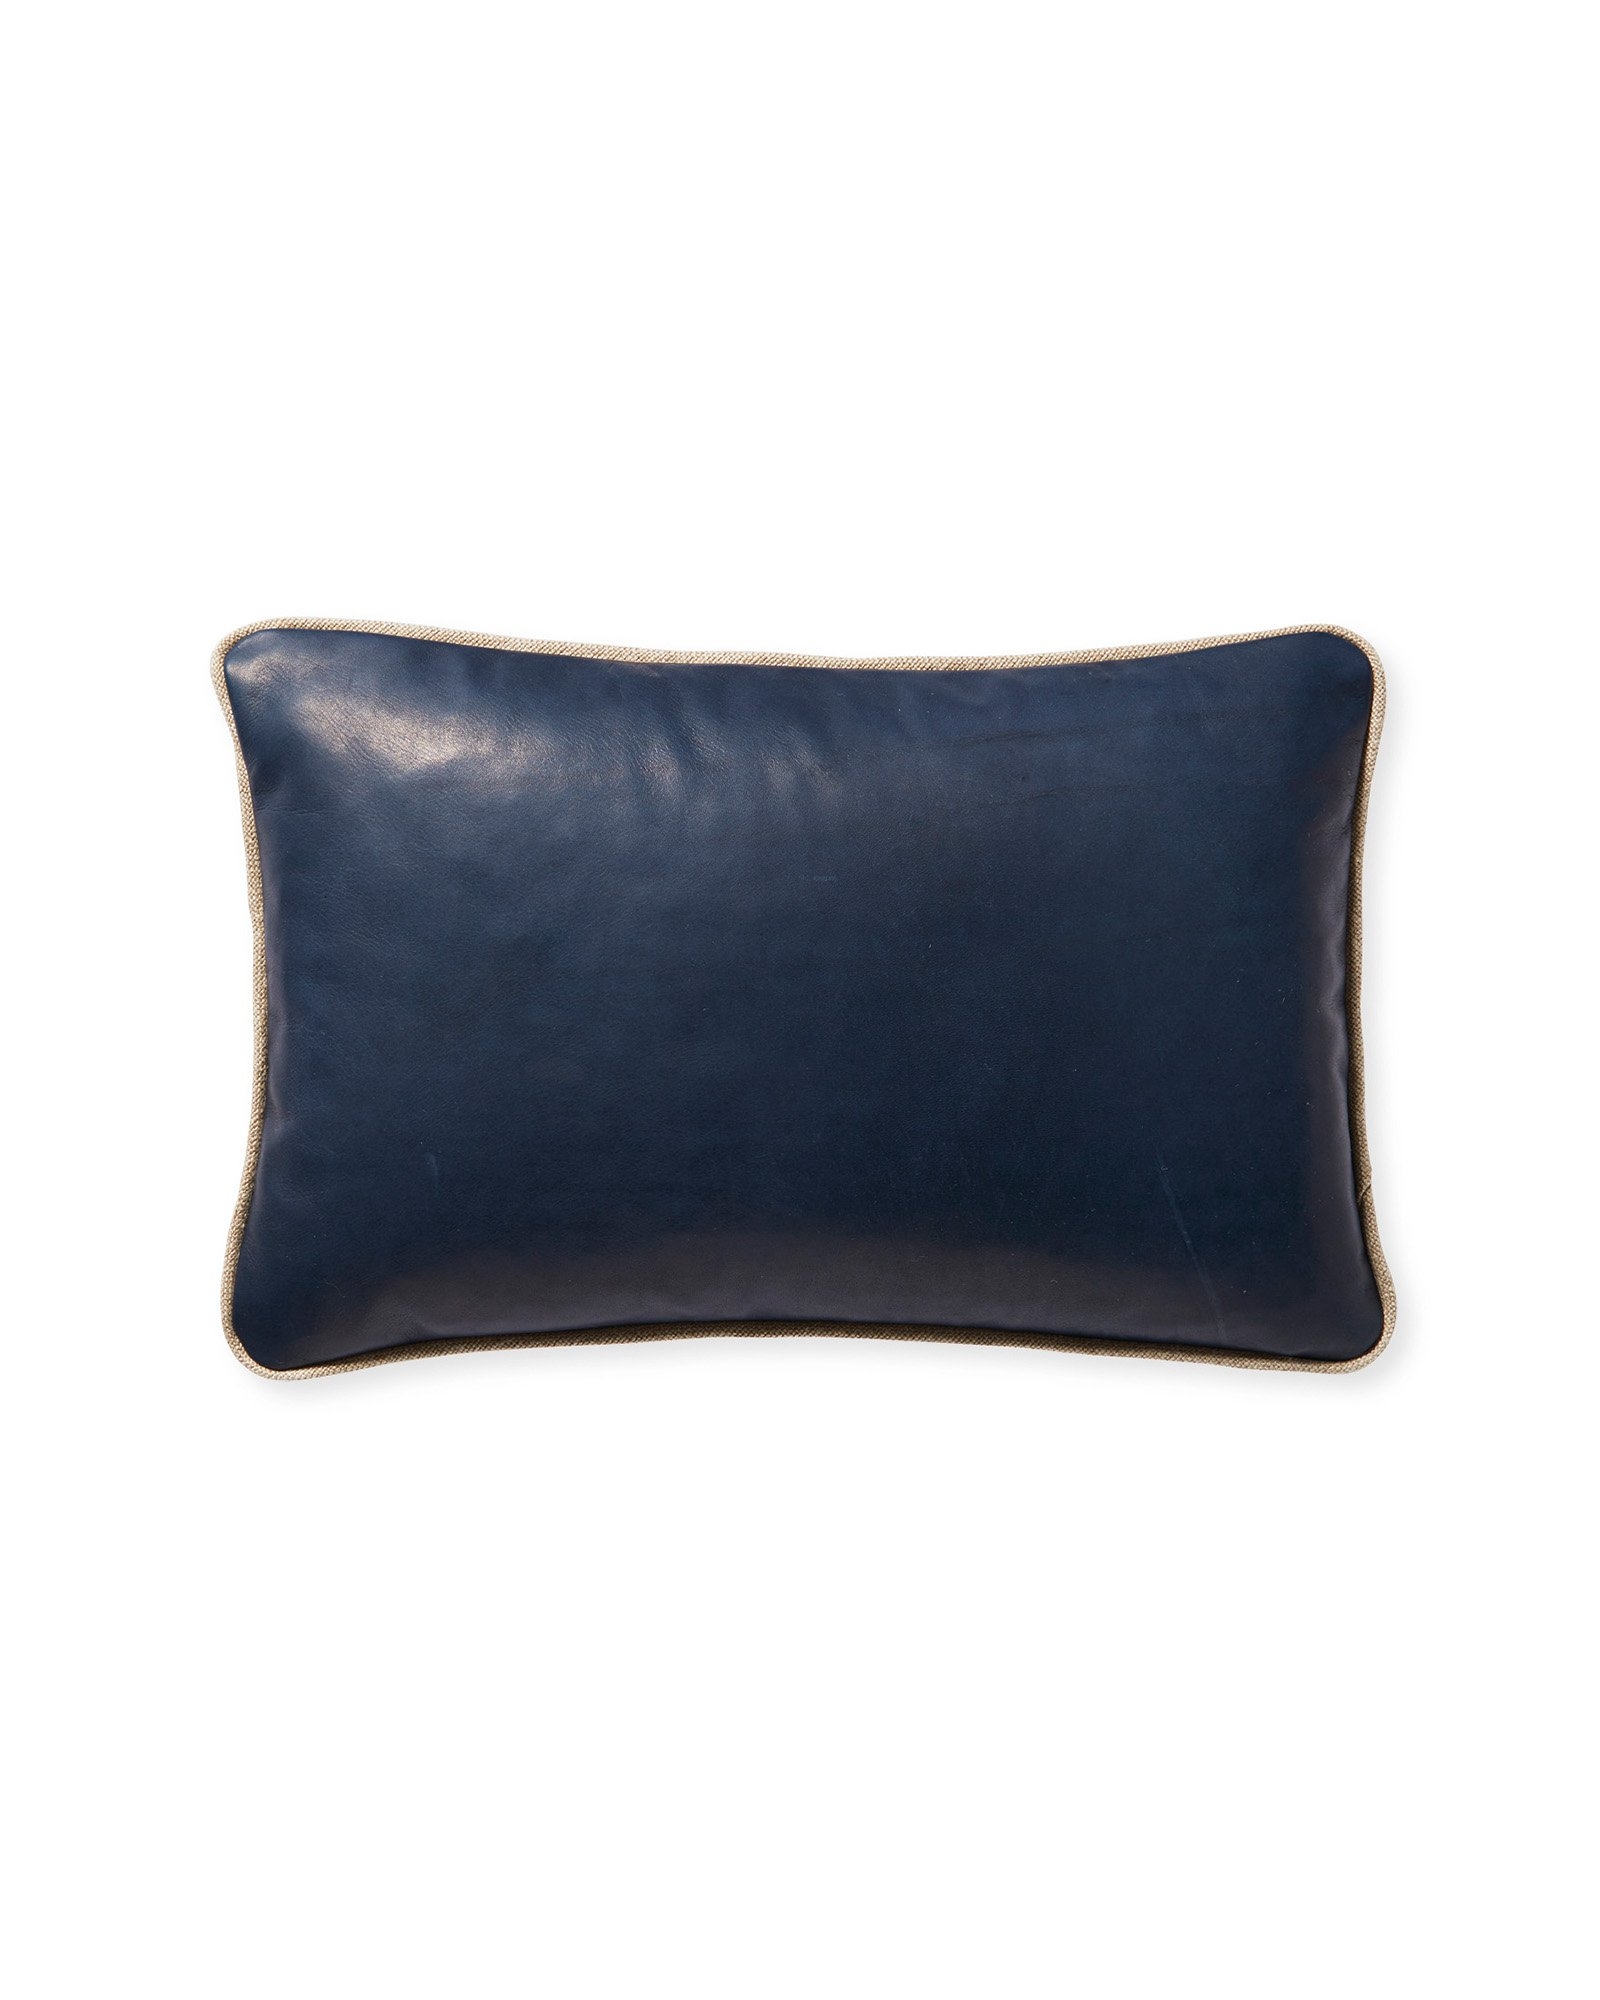 Leather 12" x 18" Pillow Cover - Midnight - Insert sold separately - Image 1